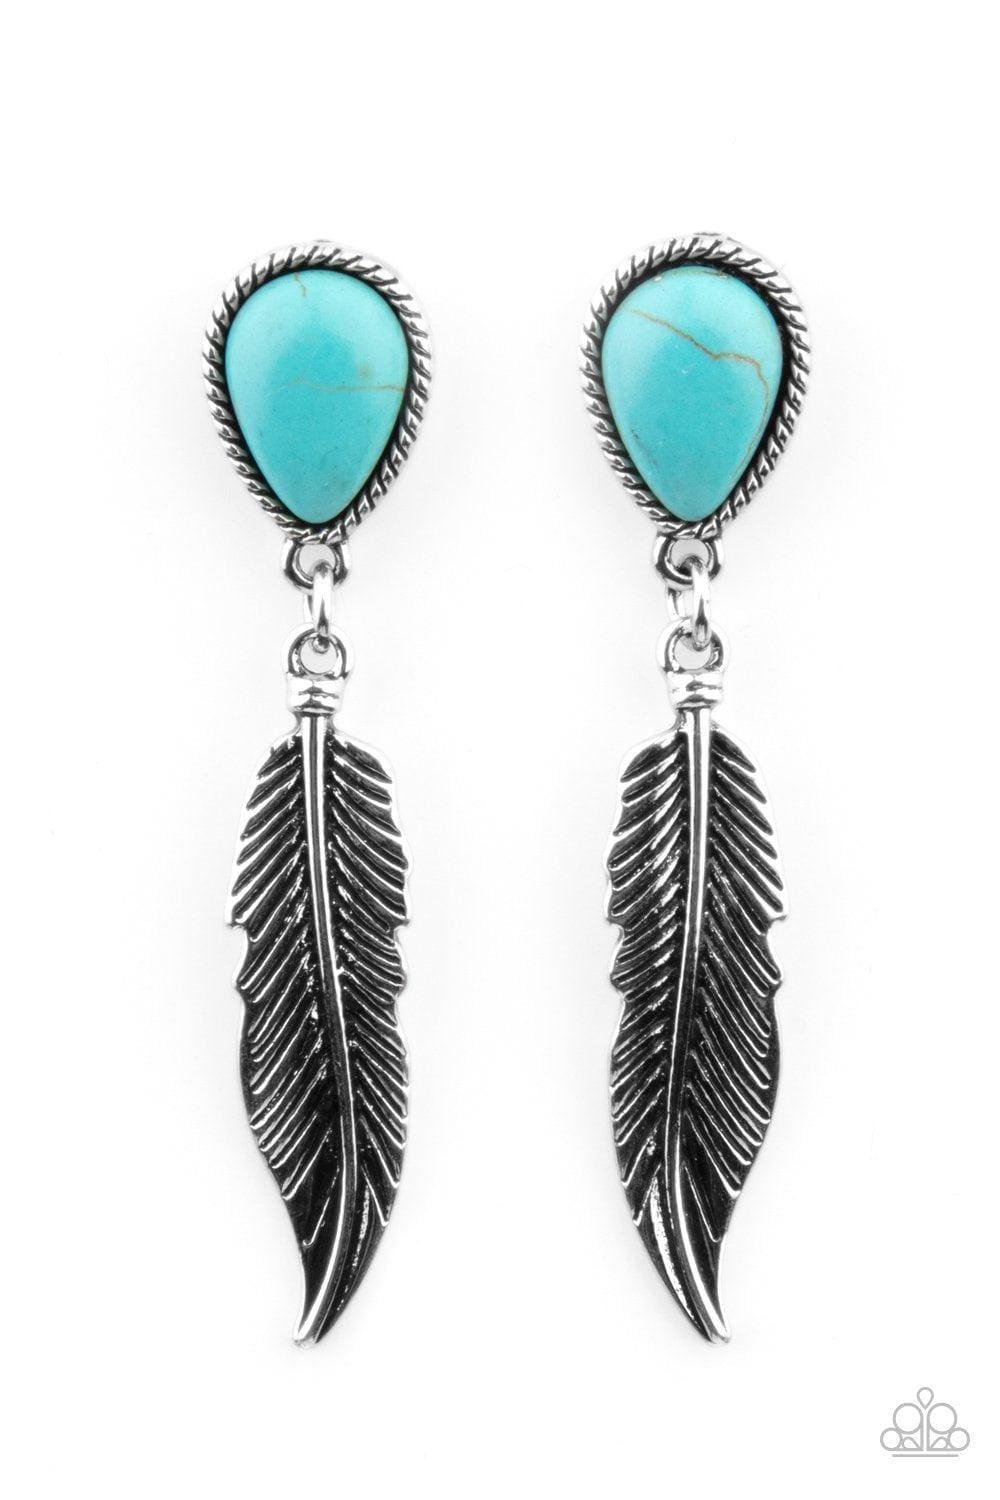 Paparazzi Accessories - Totally Tran-quill - Blue (turquoise) Earrings - Bling by JessieK